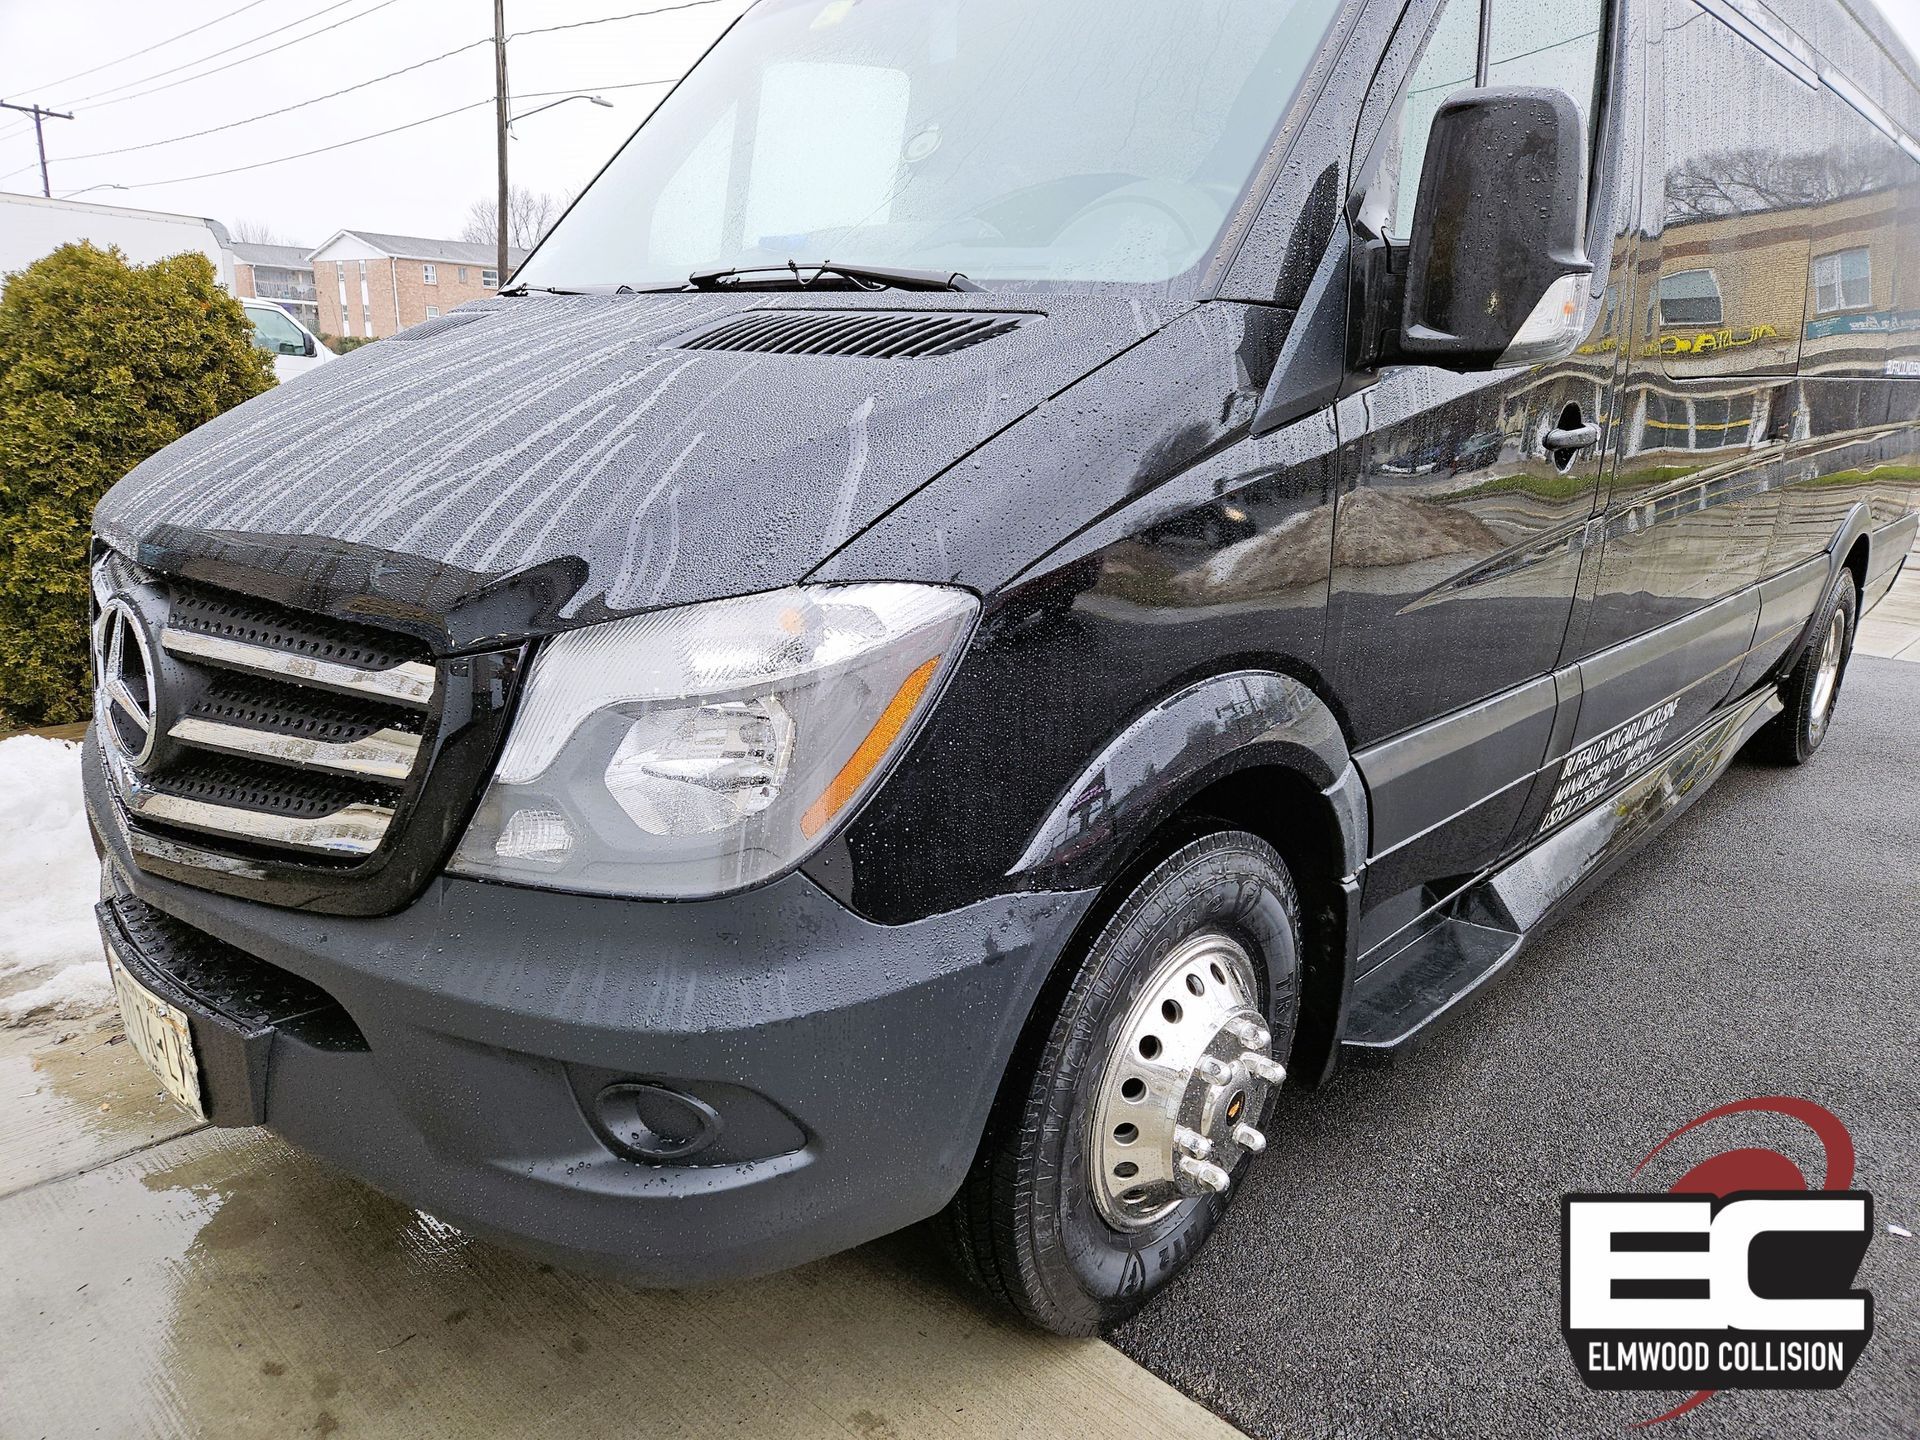 transport van after completed repair work at elmwood collision in buffalo new york